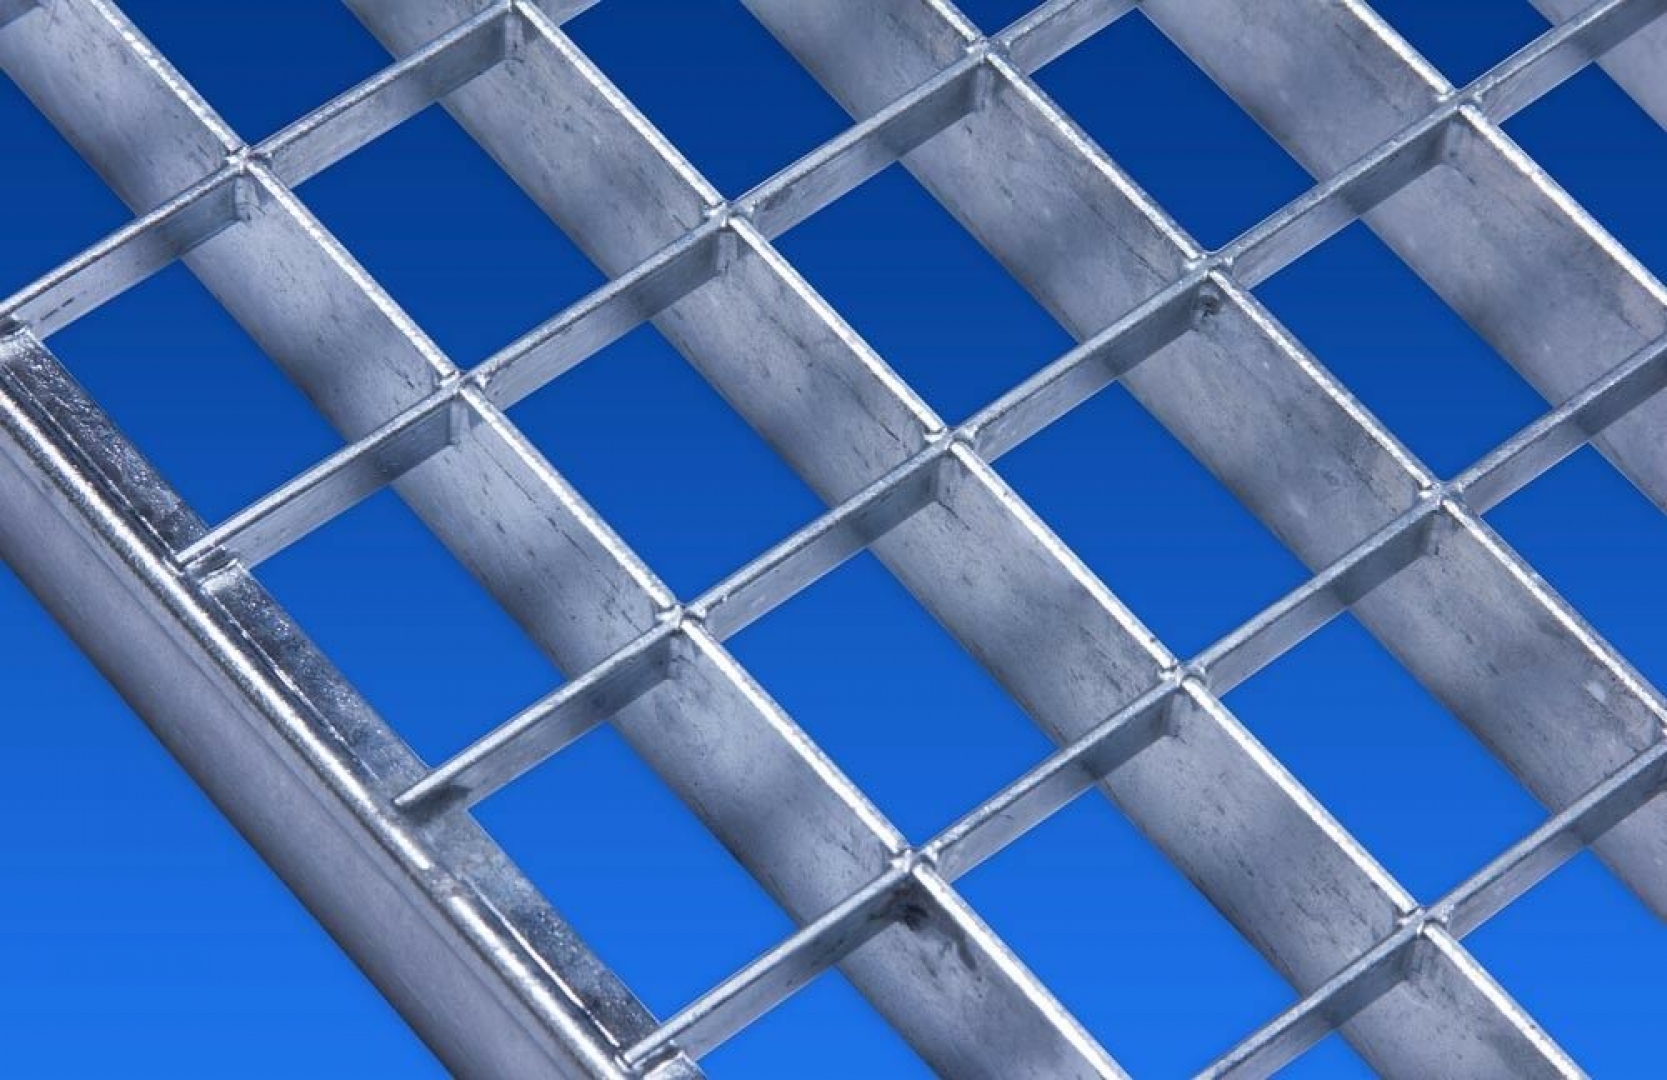 Baunorm grating 600x600mm / 590x590mm galvanized mesh size 30x30mm height 40mm without frame